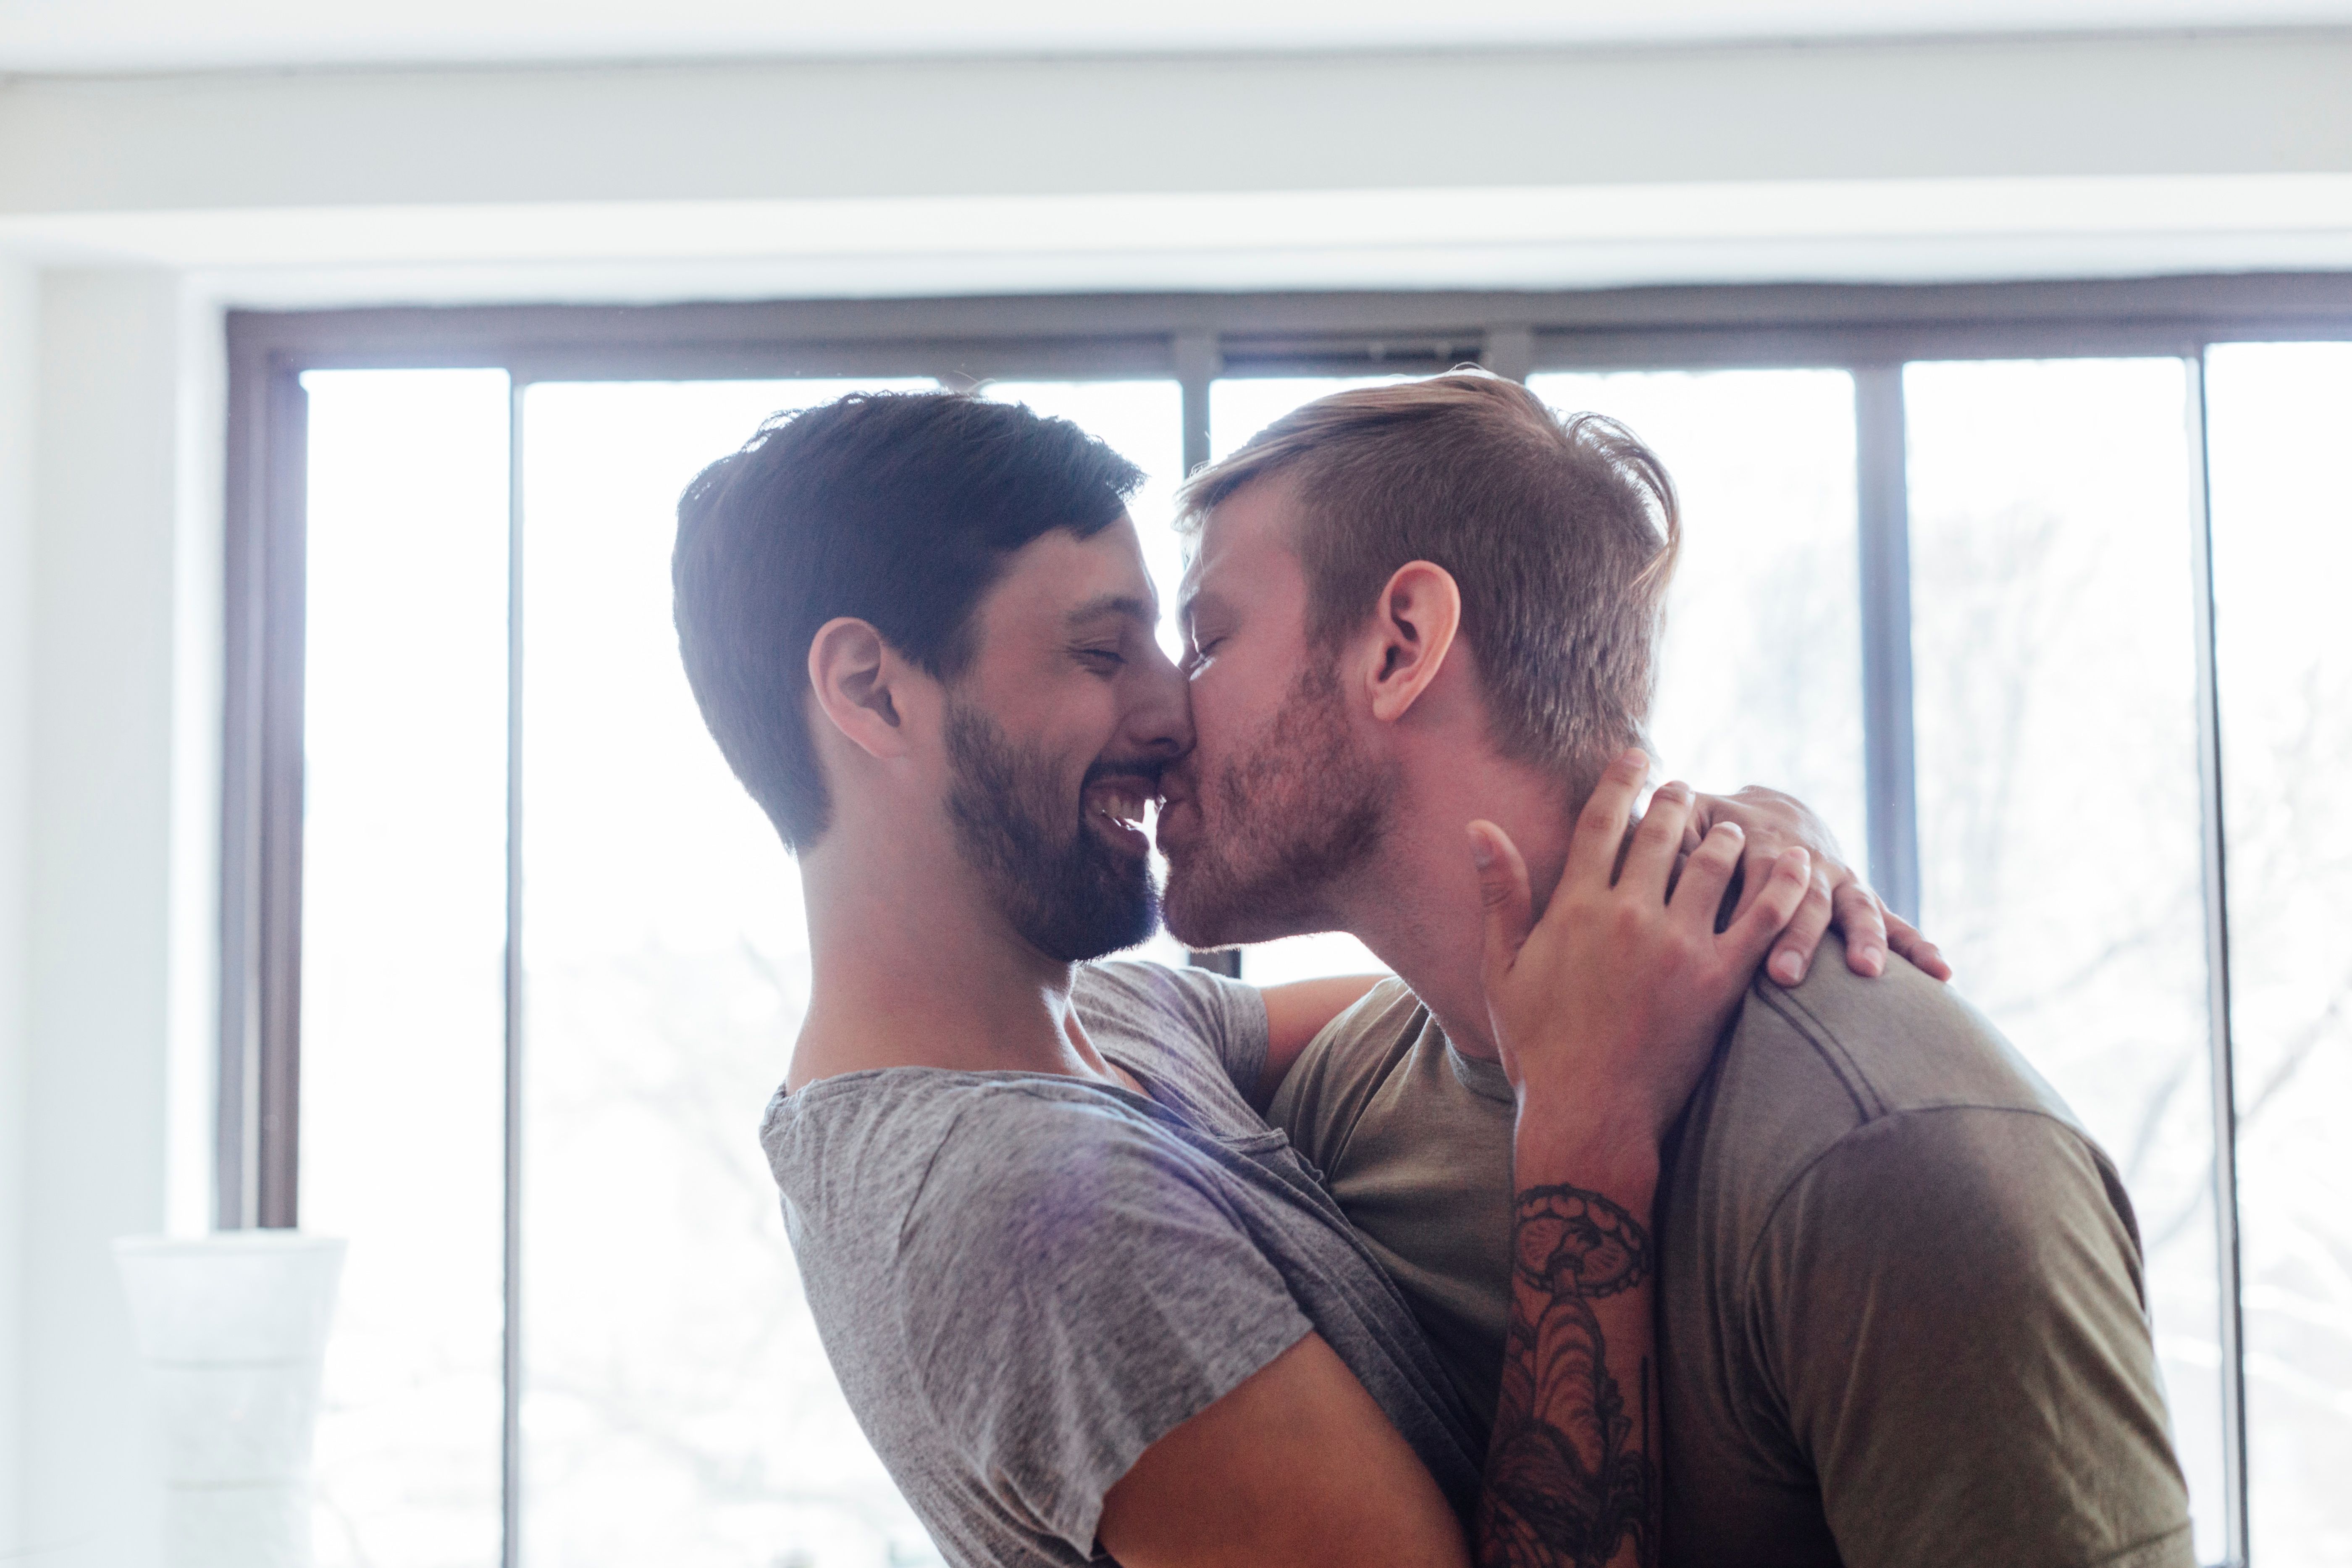 8 Expert Tips for Bicurious Guys Ready to Explore Their Sexuality